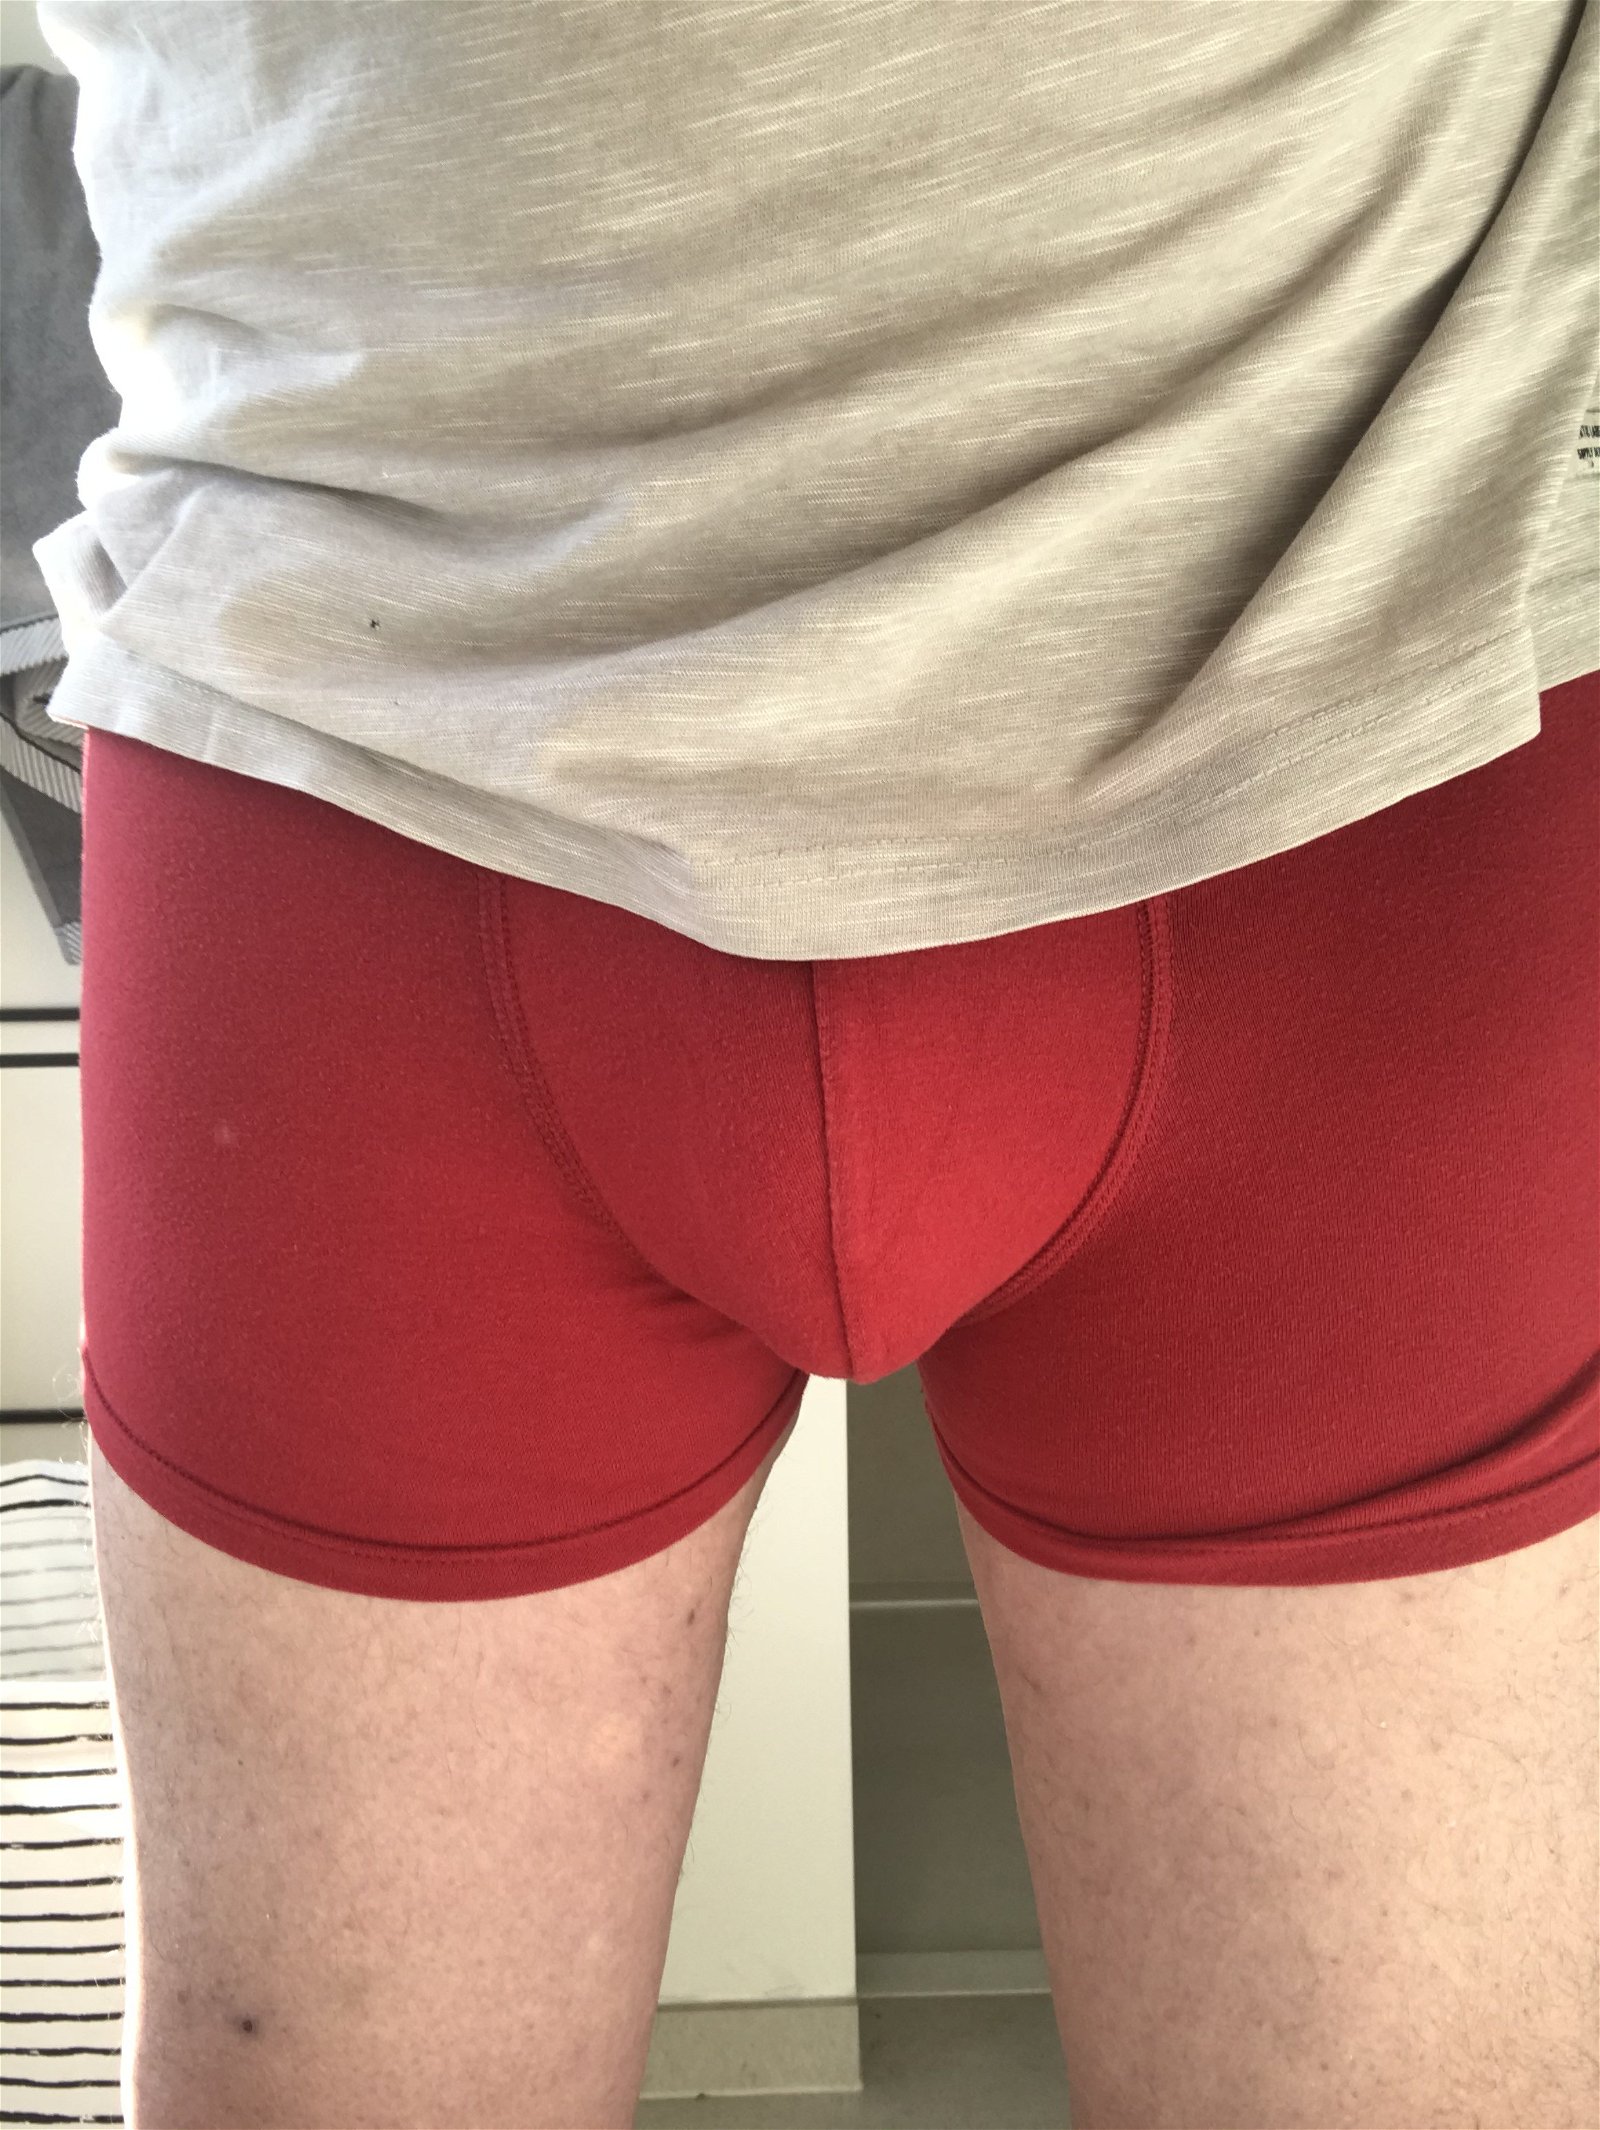 Photo by Jurl Varg with the username @jurlvarg,  May 14, 2020 at 4:39 PM. The post is about the topic Pee and the text says 'Any ladies or couples want me to wet these for them?
#pee #piss #shorts #selfie #me #homemade #amateur #request'